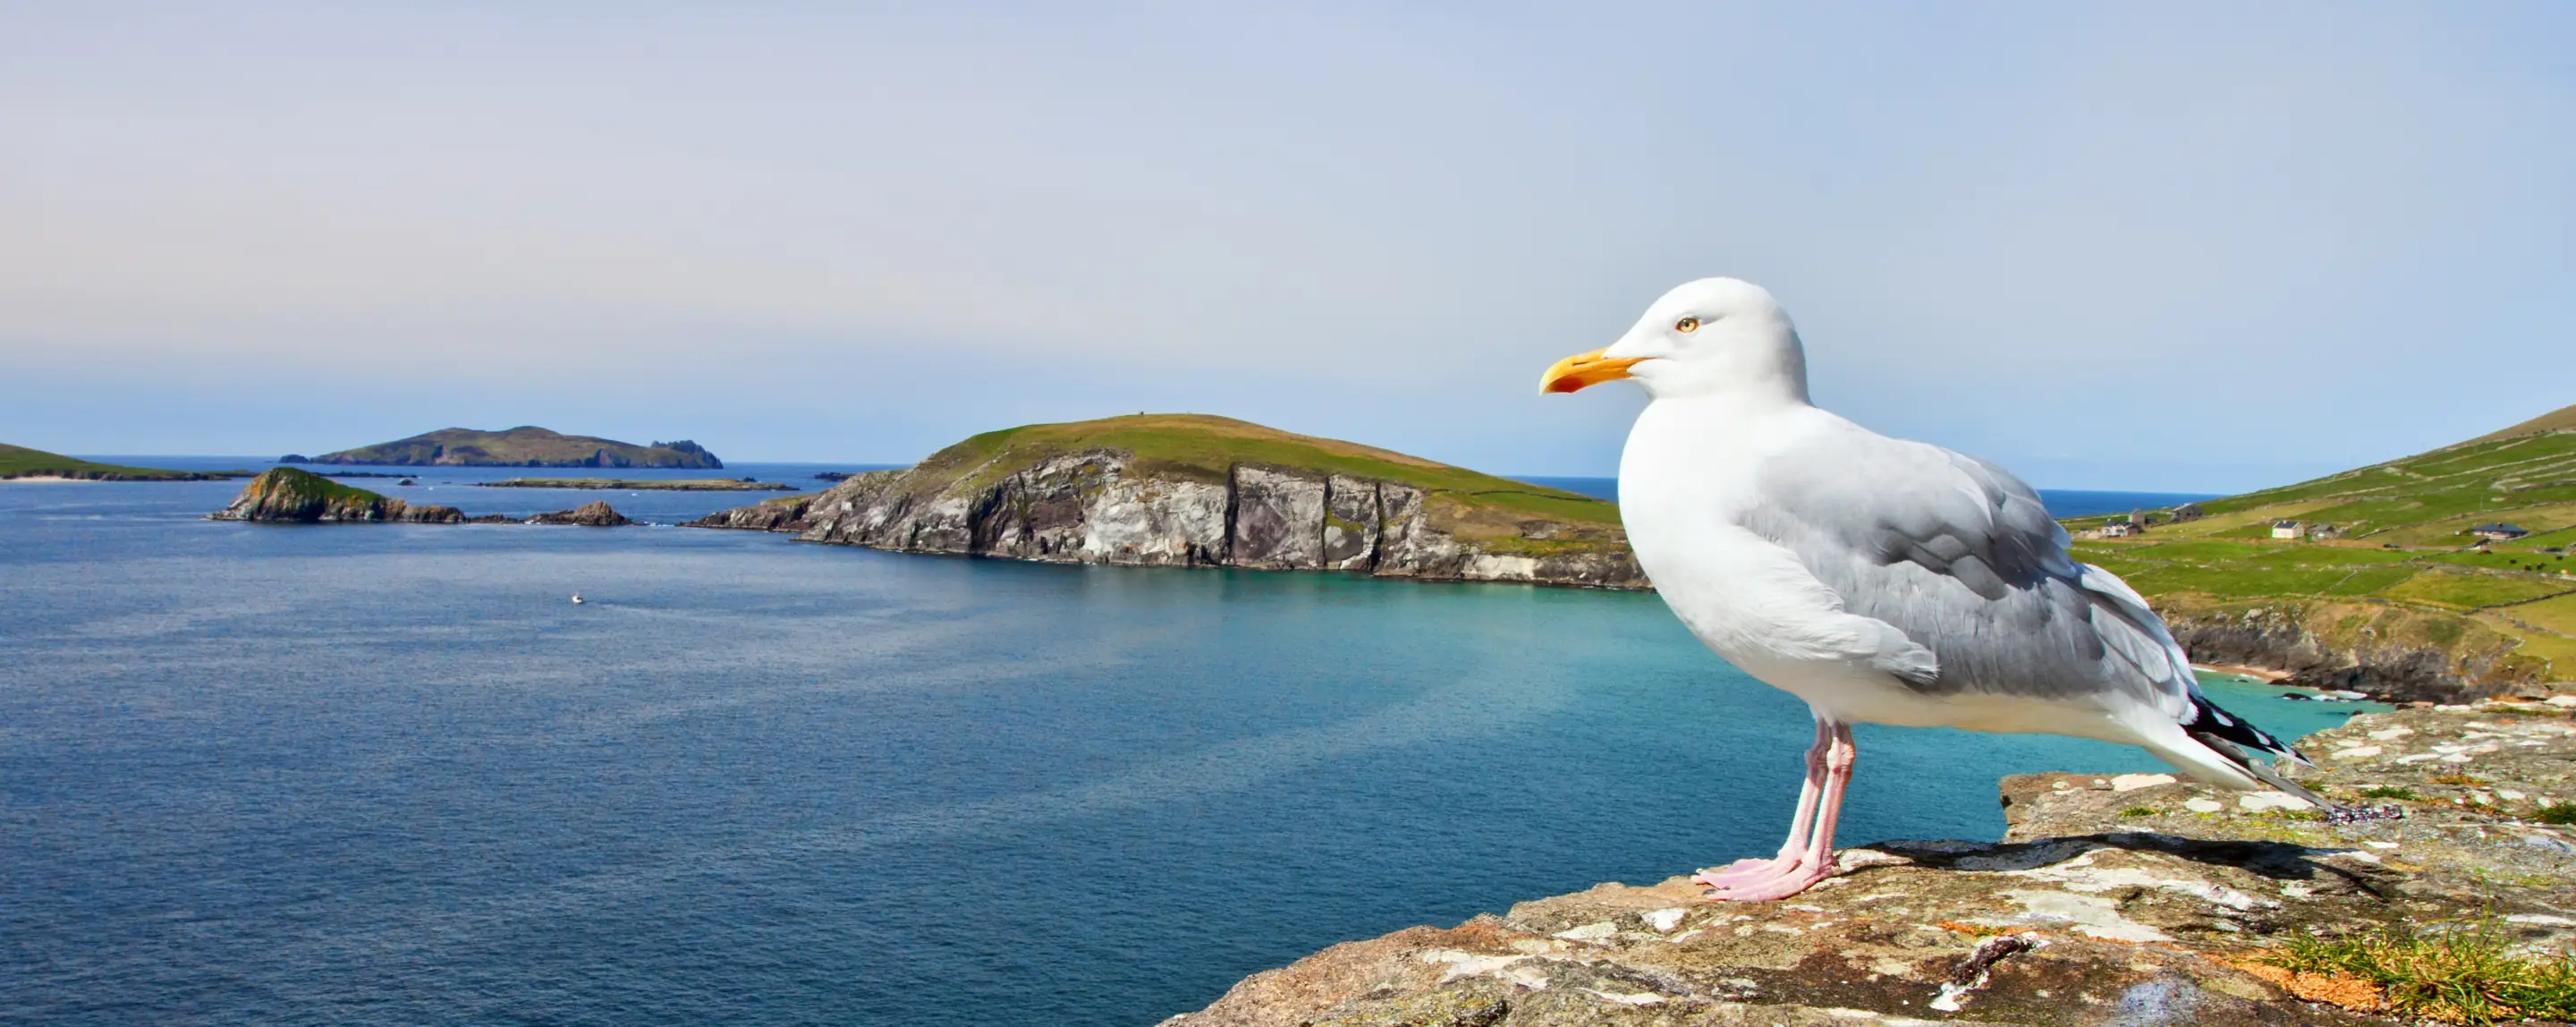 Large atmospheric decorative image of an Irish coastline with a seagul near the camera perched on a rock.